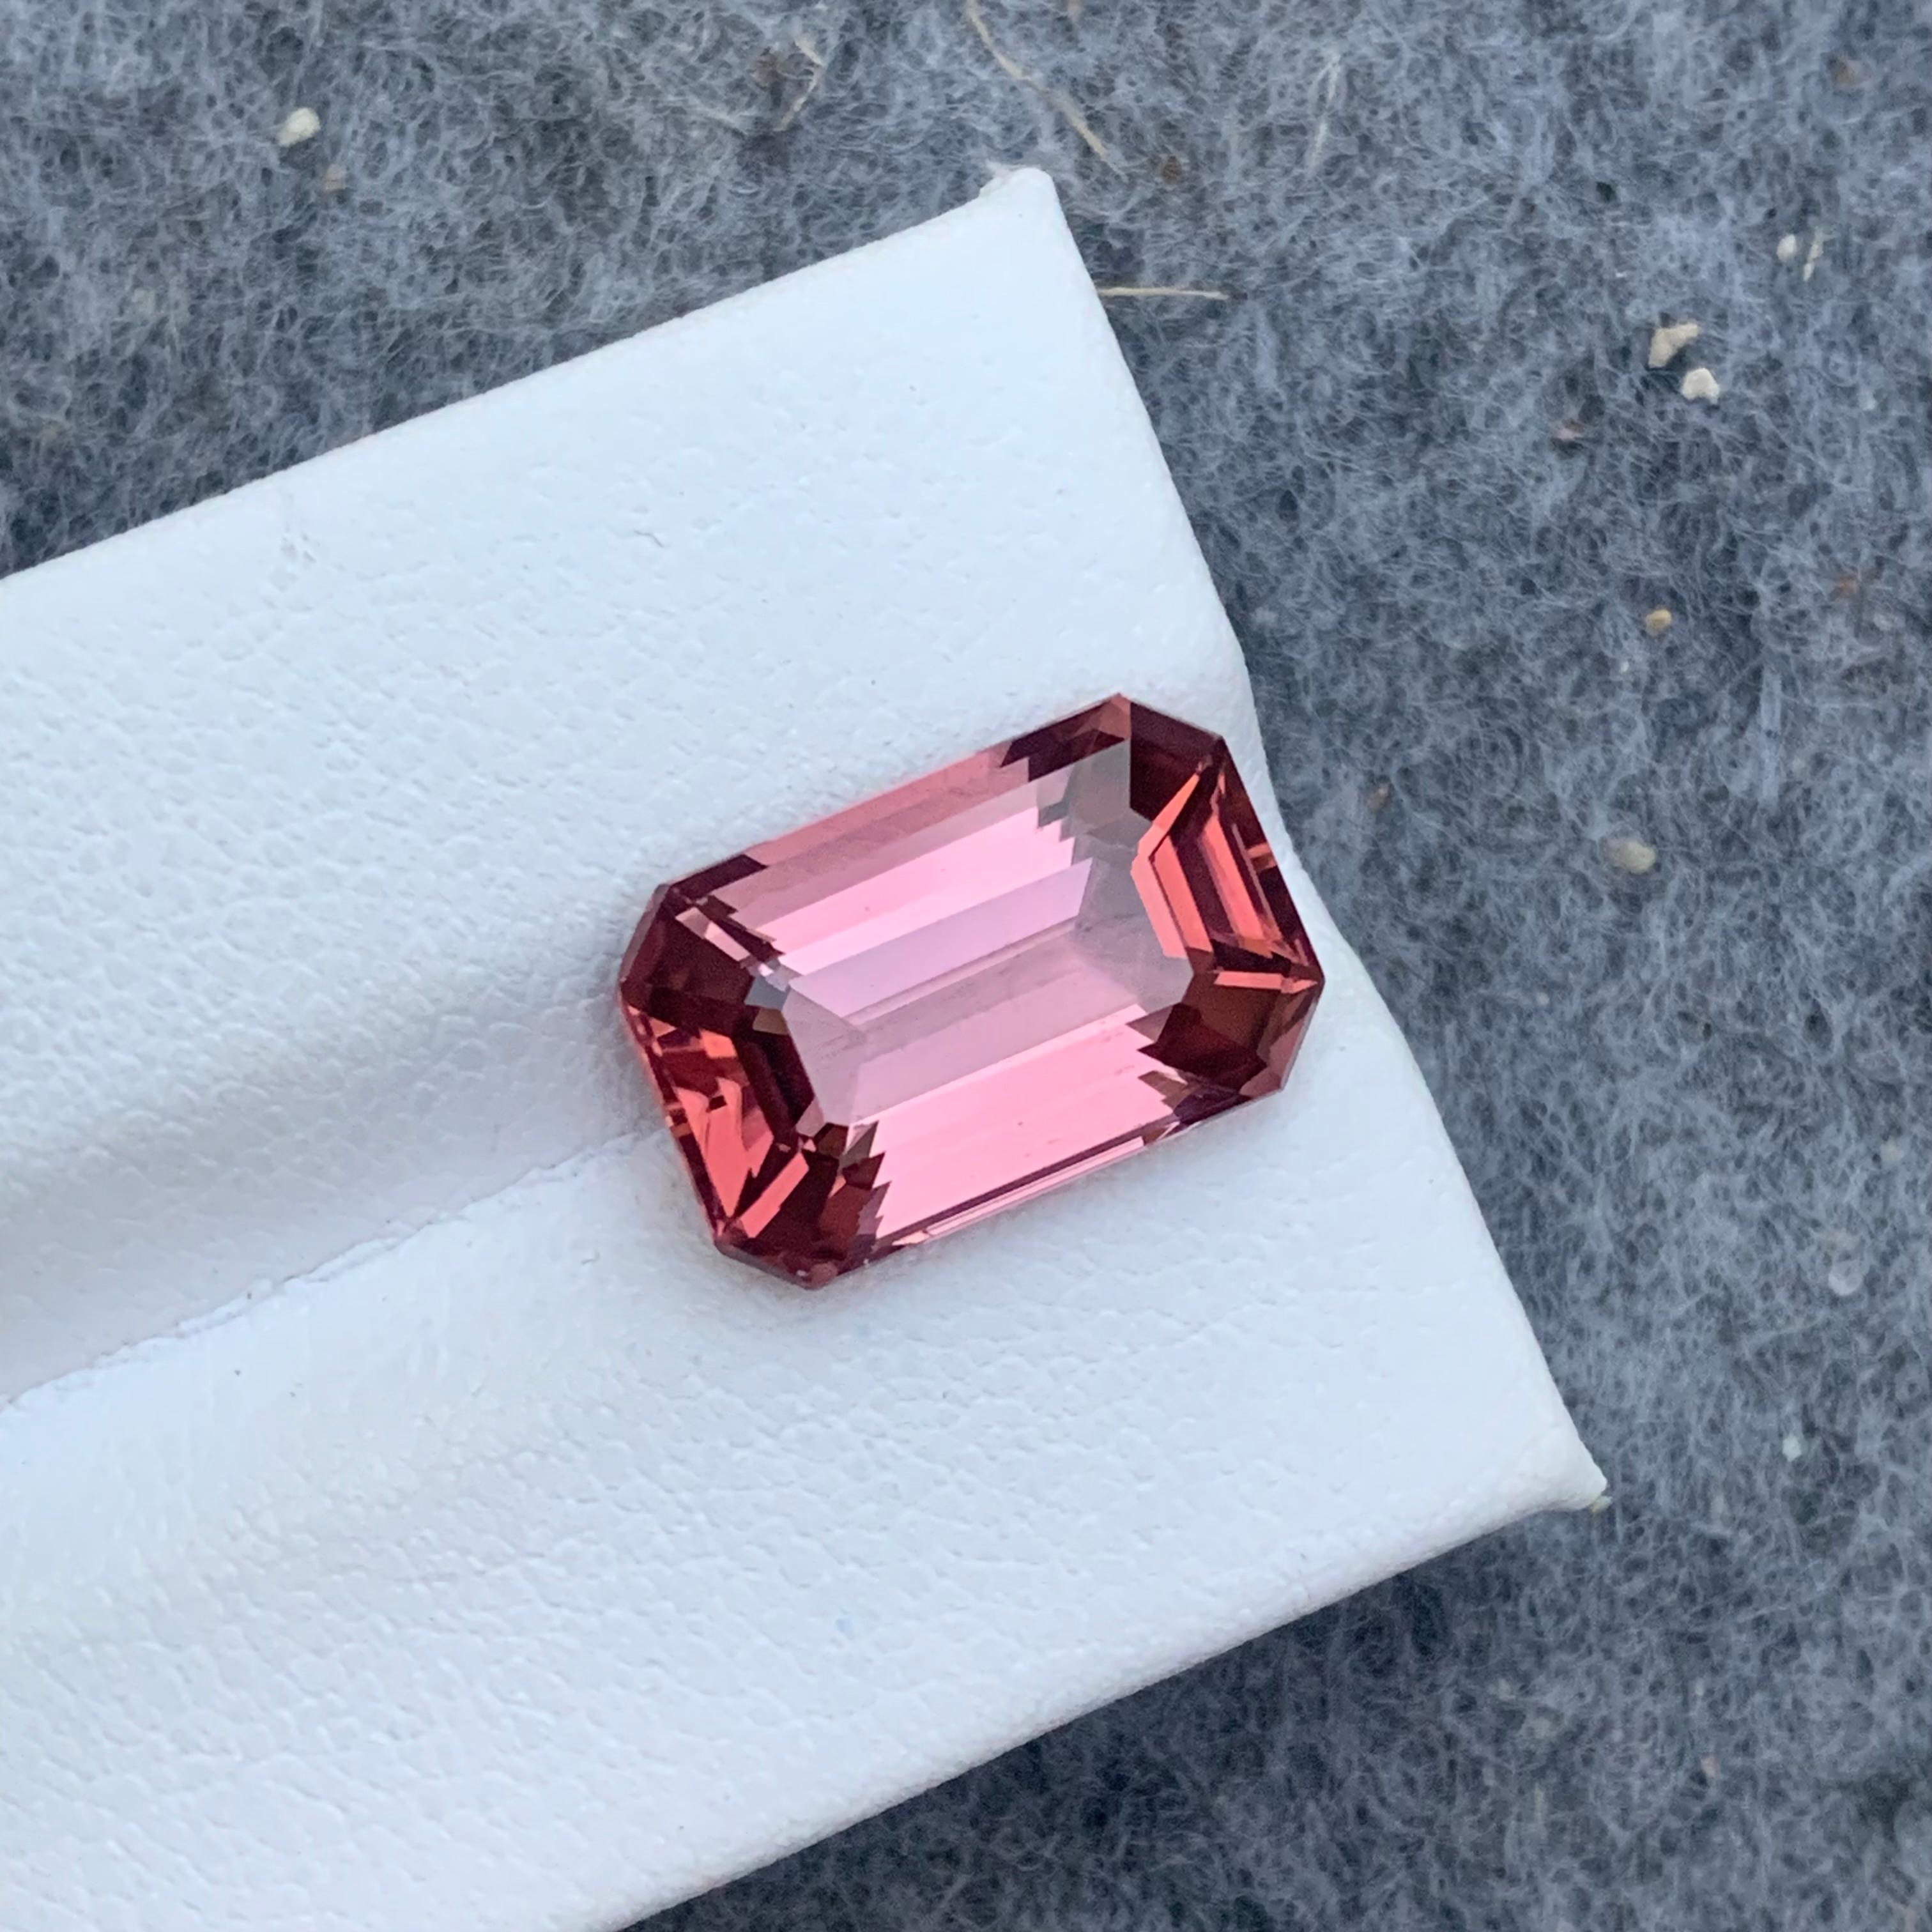 9.0 Carat AAA Quality Loose Soft Pink Tourmaline Emerald Cut From Afghanistan 15